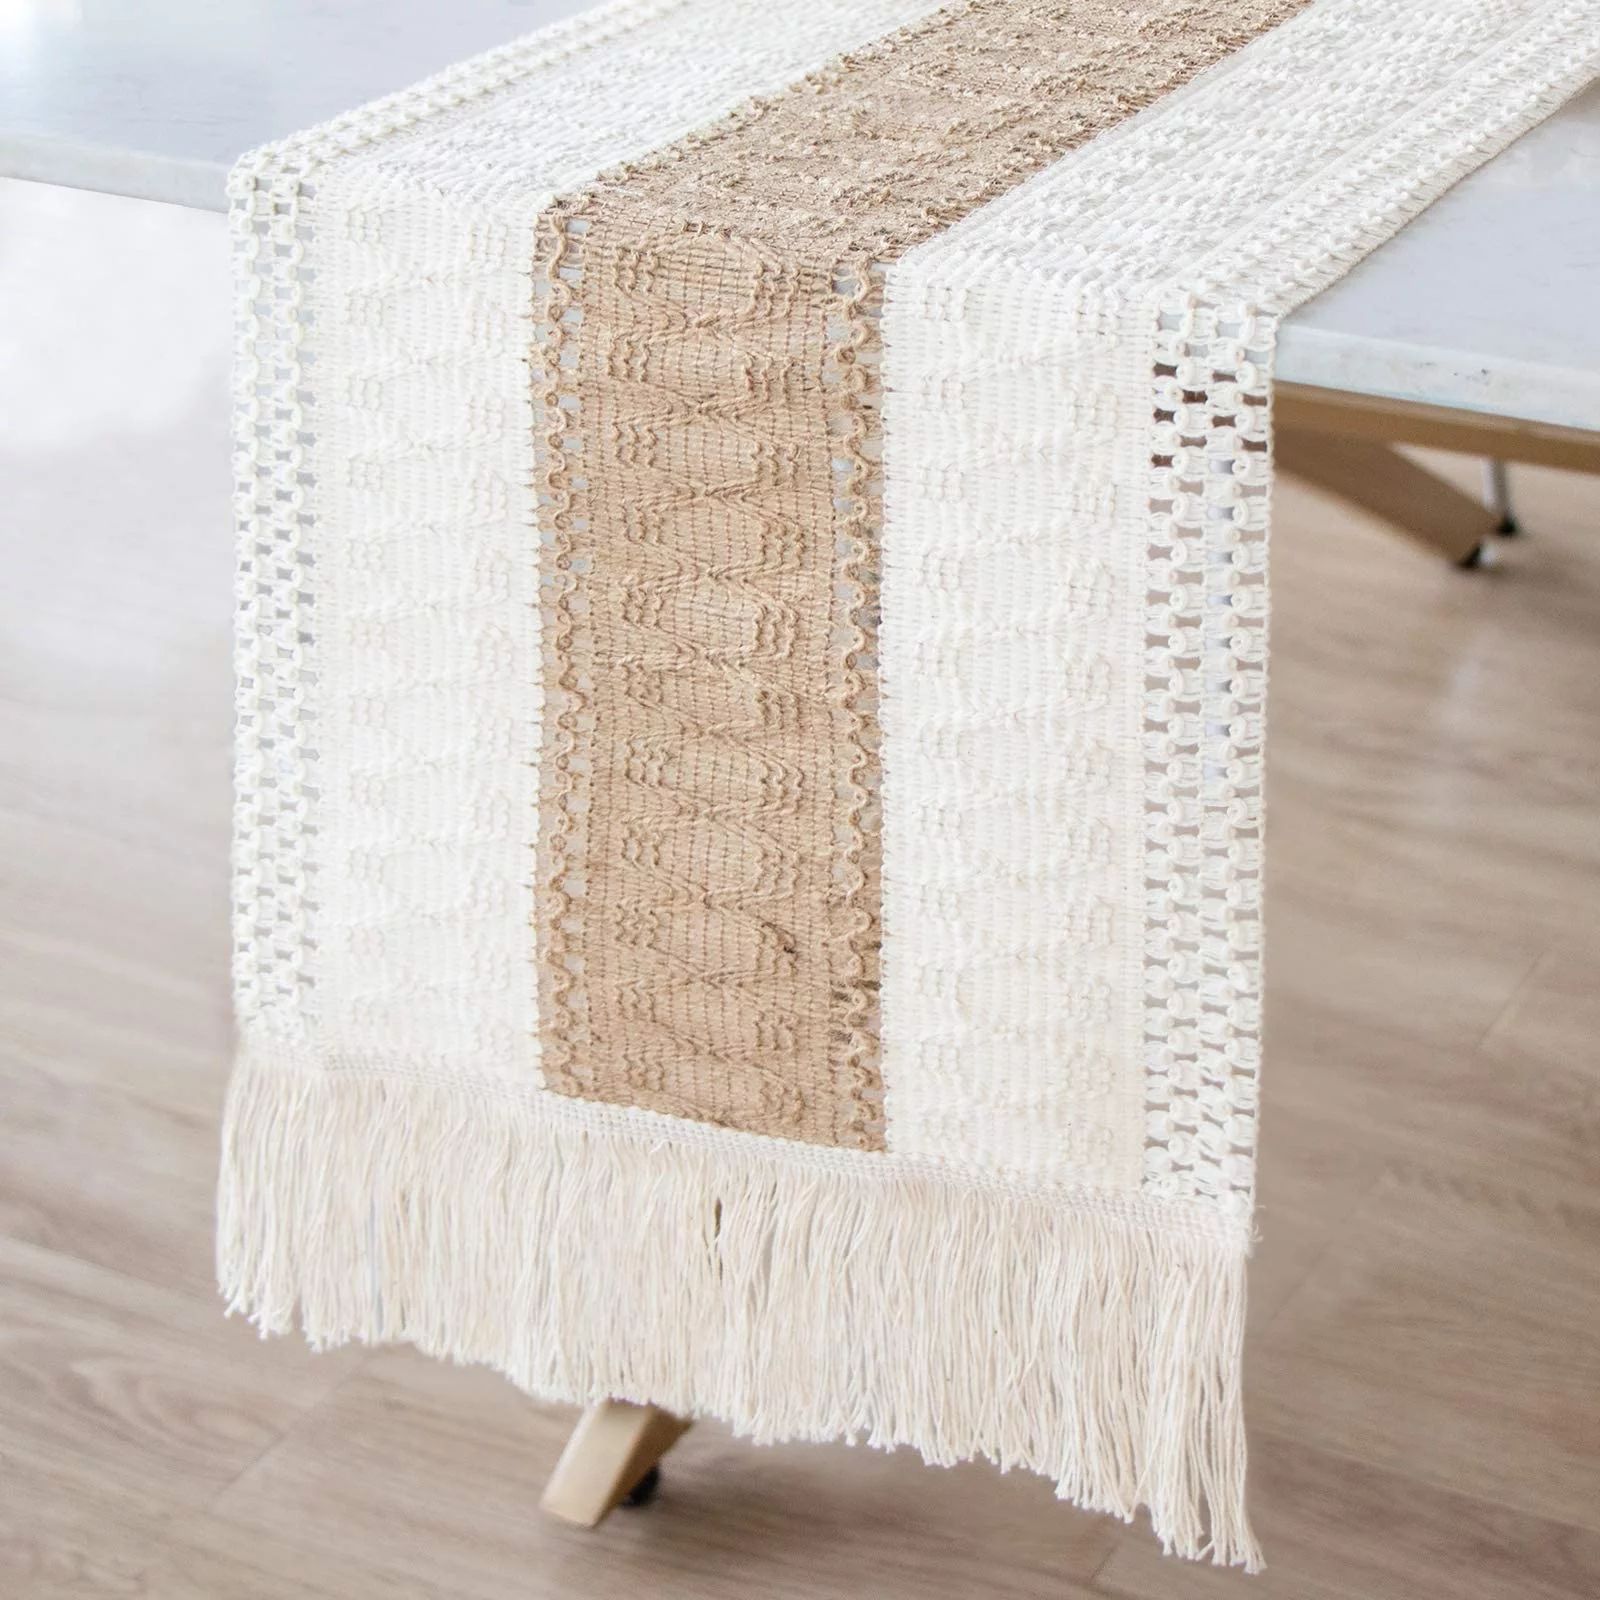 Husfou Woven Macrame Table Runner, Splicing Cotton Burlap Table Runner with Tassels for Bohemian ... | Walmart (US)